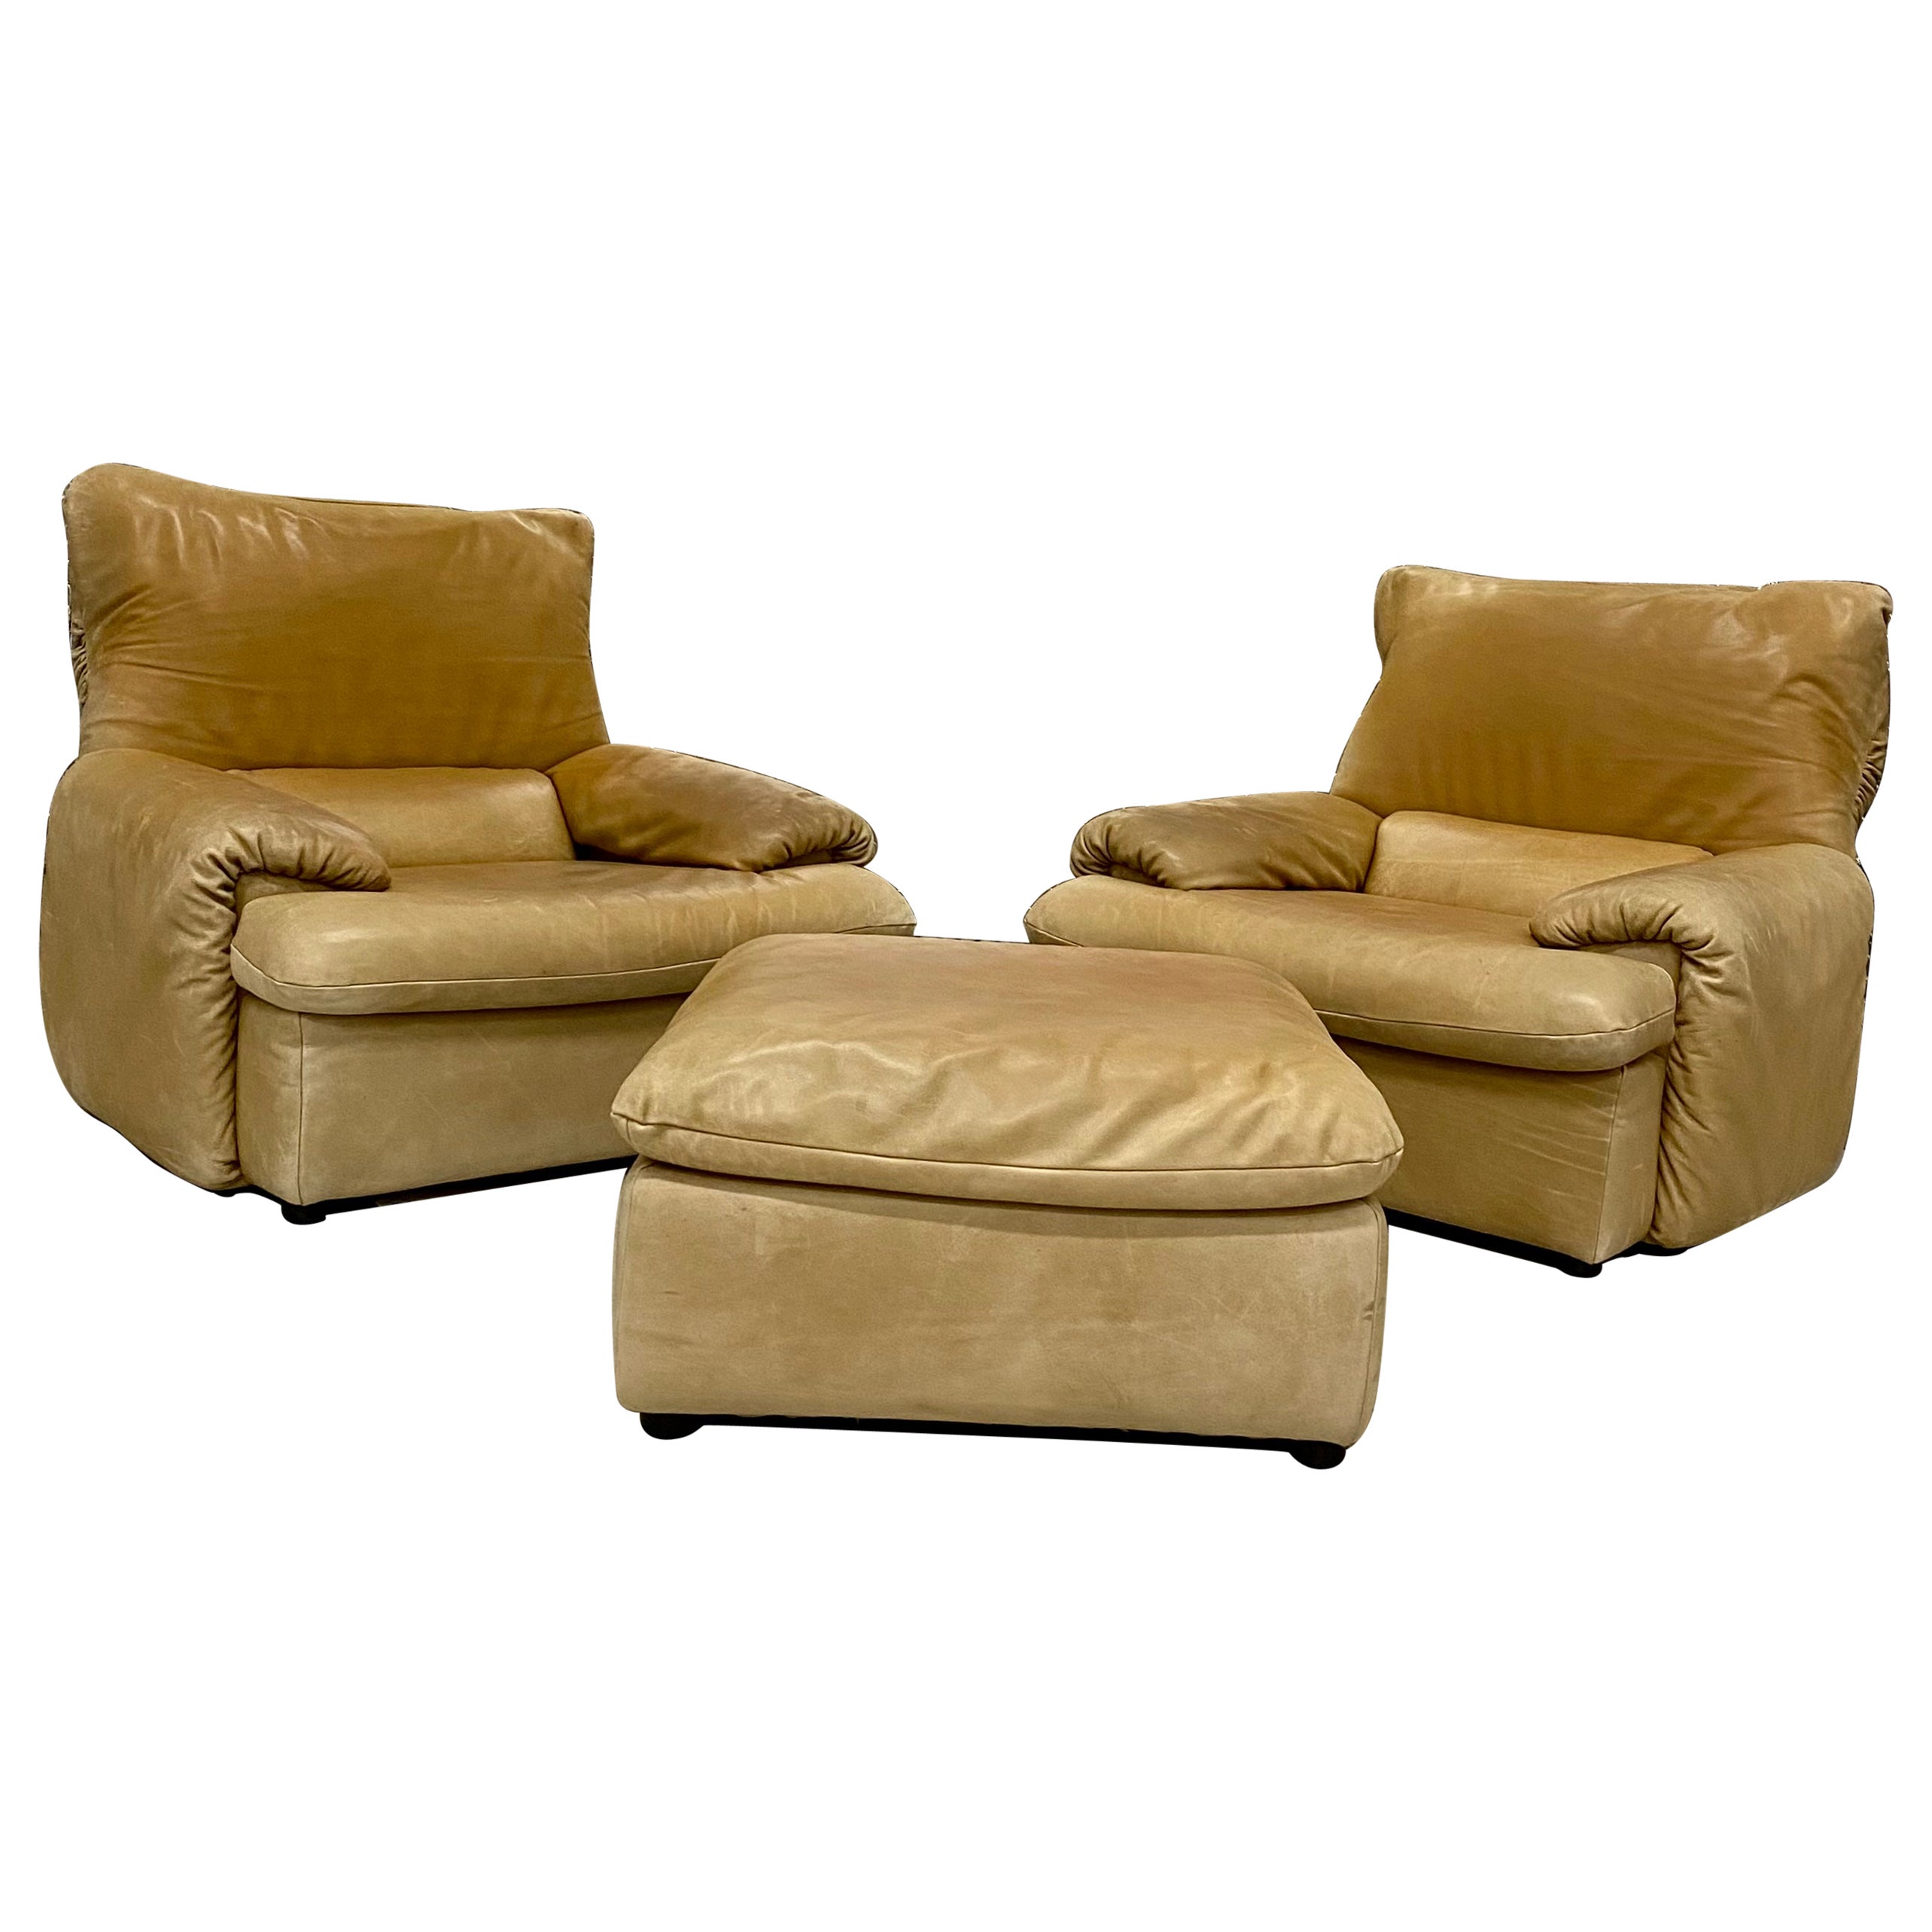 Attributed to Cassina Rare Cube Maralunga Leather Chairs and Ottoman, Set of 3 For Sale